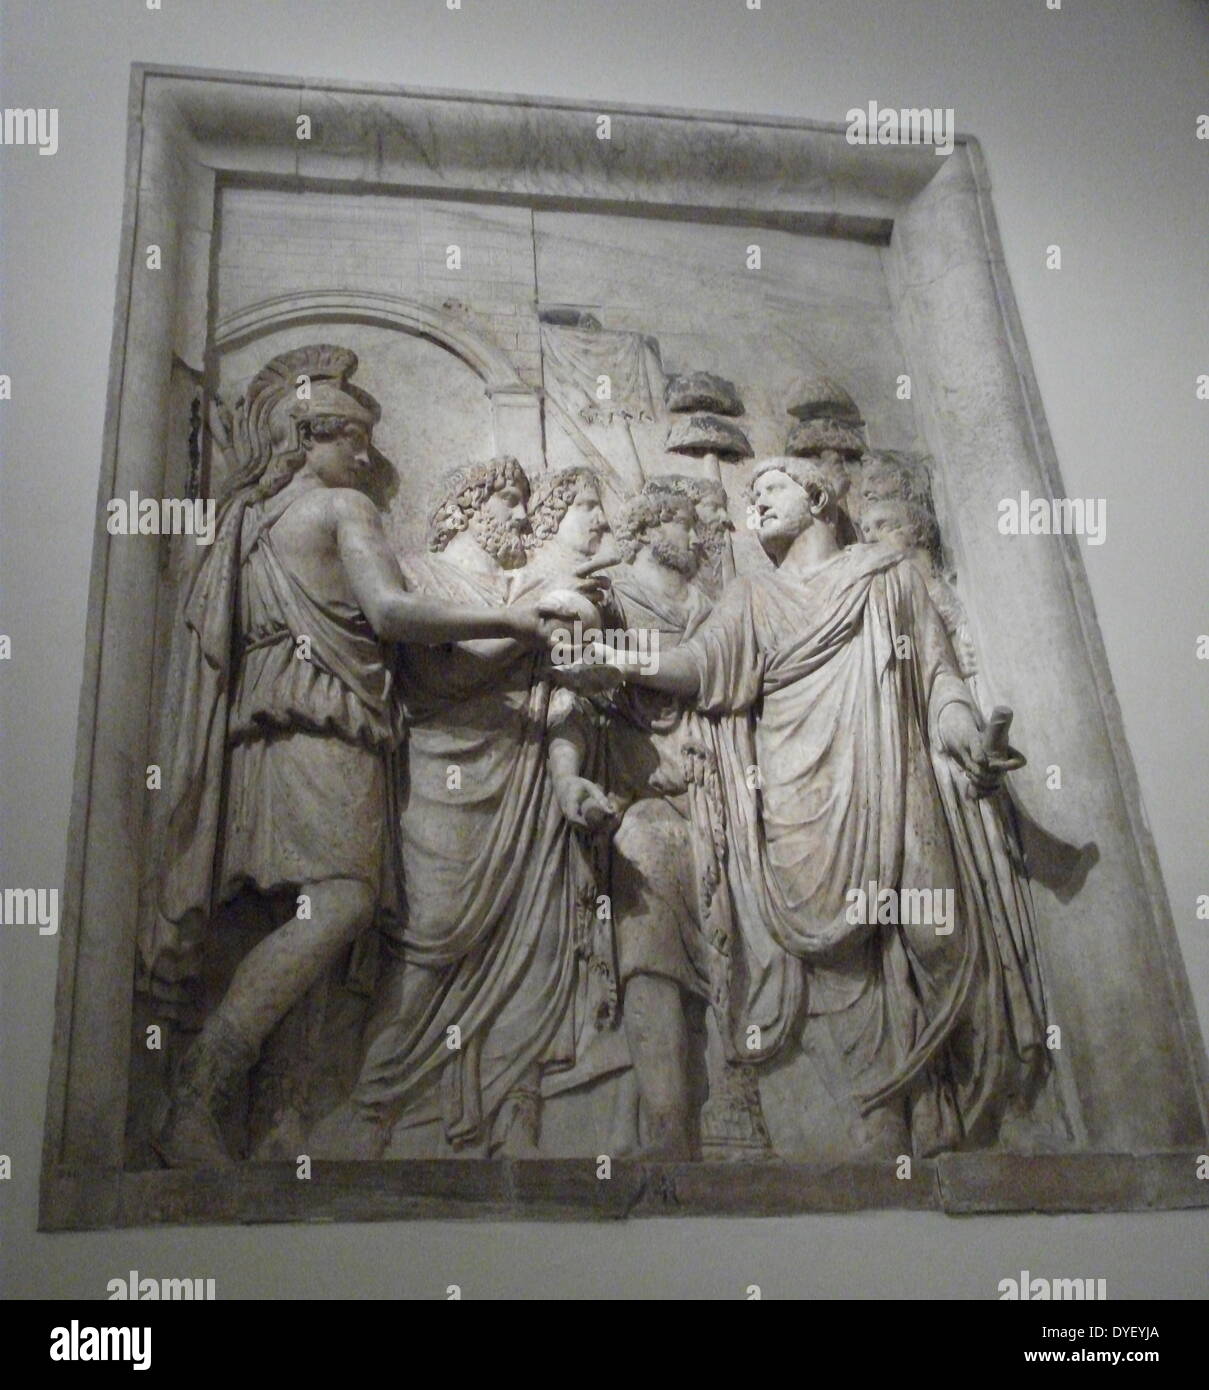 Relief depicting imperial triumph. This panel shows the Roman Emperor amongst the people. Roman, Circa 2nd century AD. Stock Photo